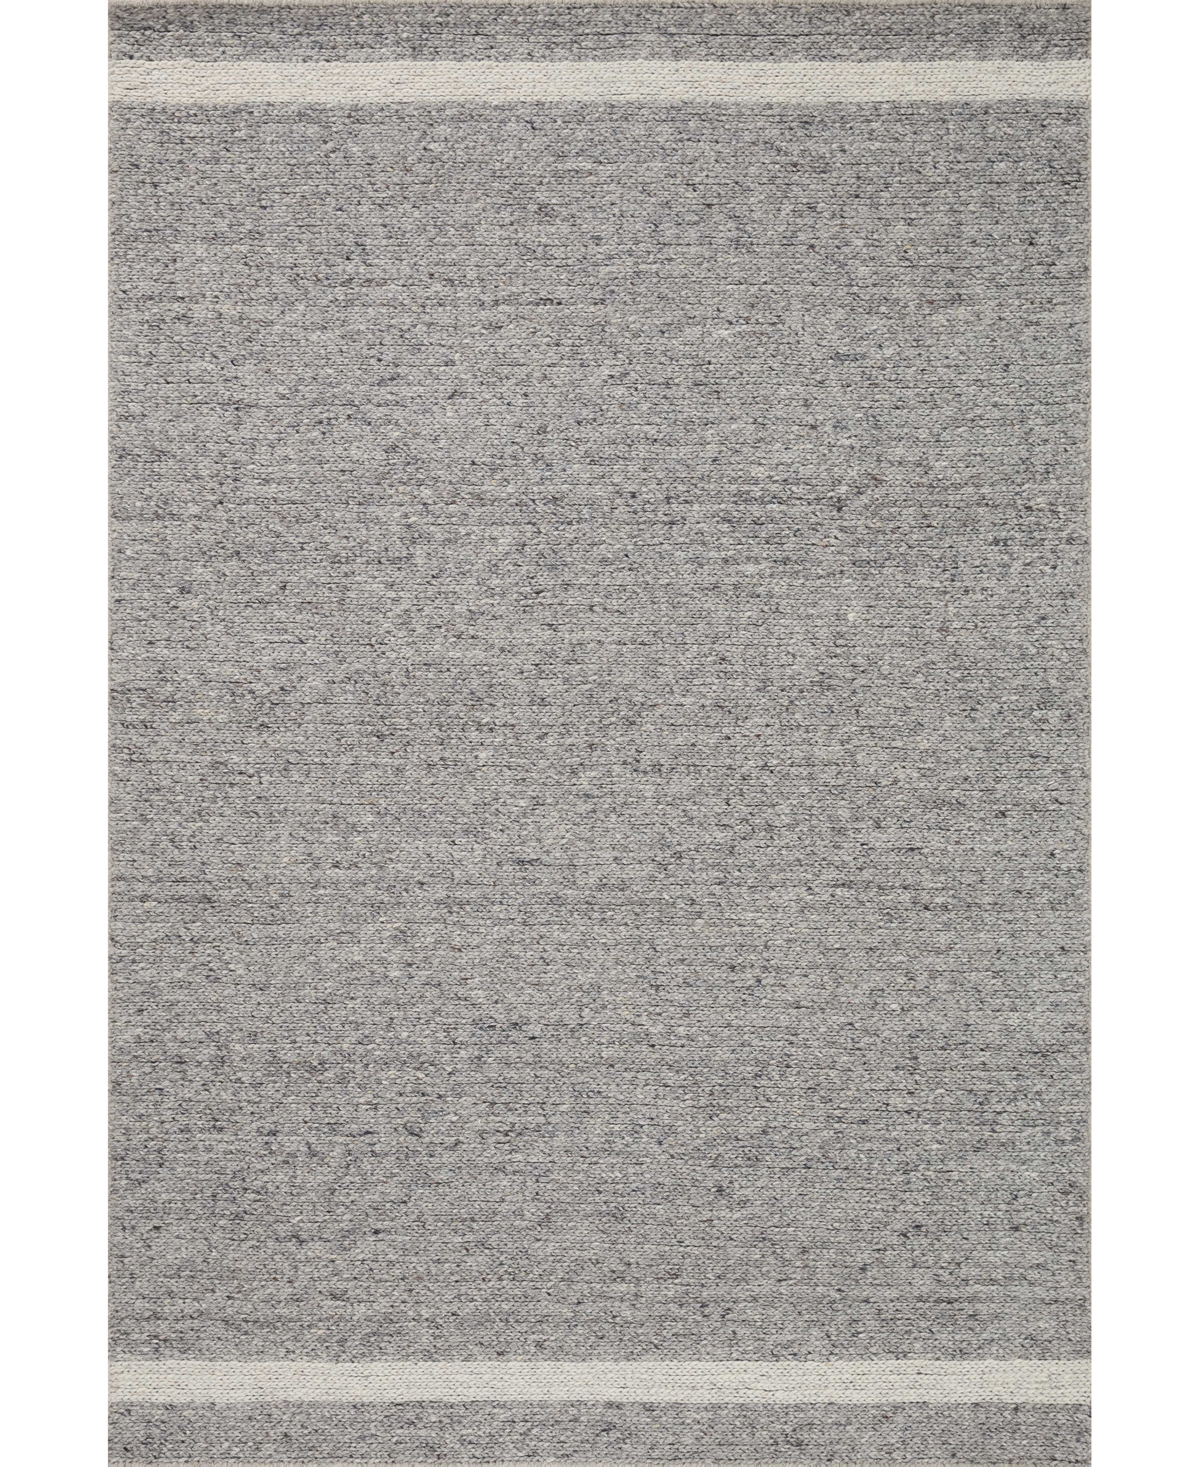 Magnolia Home By Joanna Gaines X Loloi Ashby Ash-04 2'3" X 3'9" Area Rug In Slate